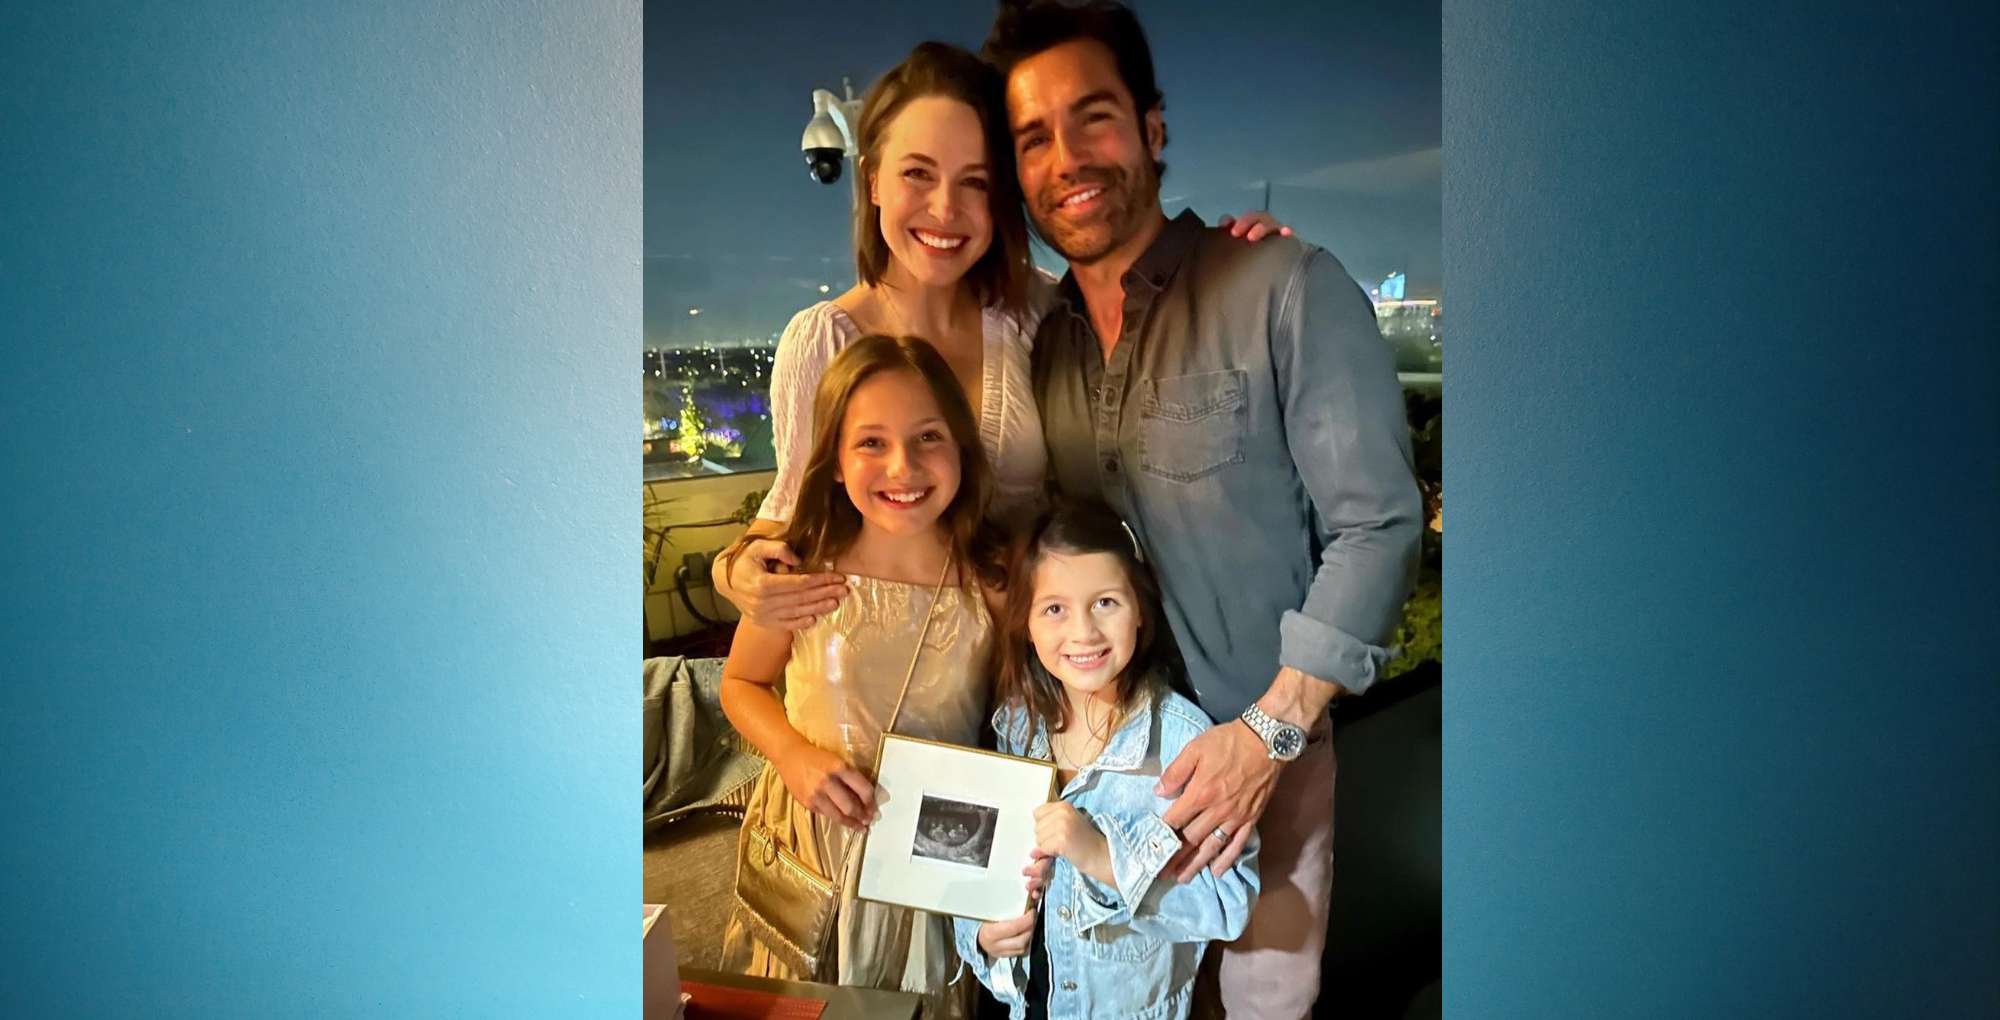 young and the restless star jordi vilasuso asks or prayers for his family